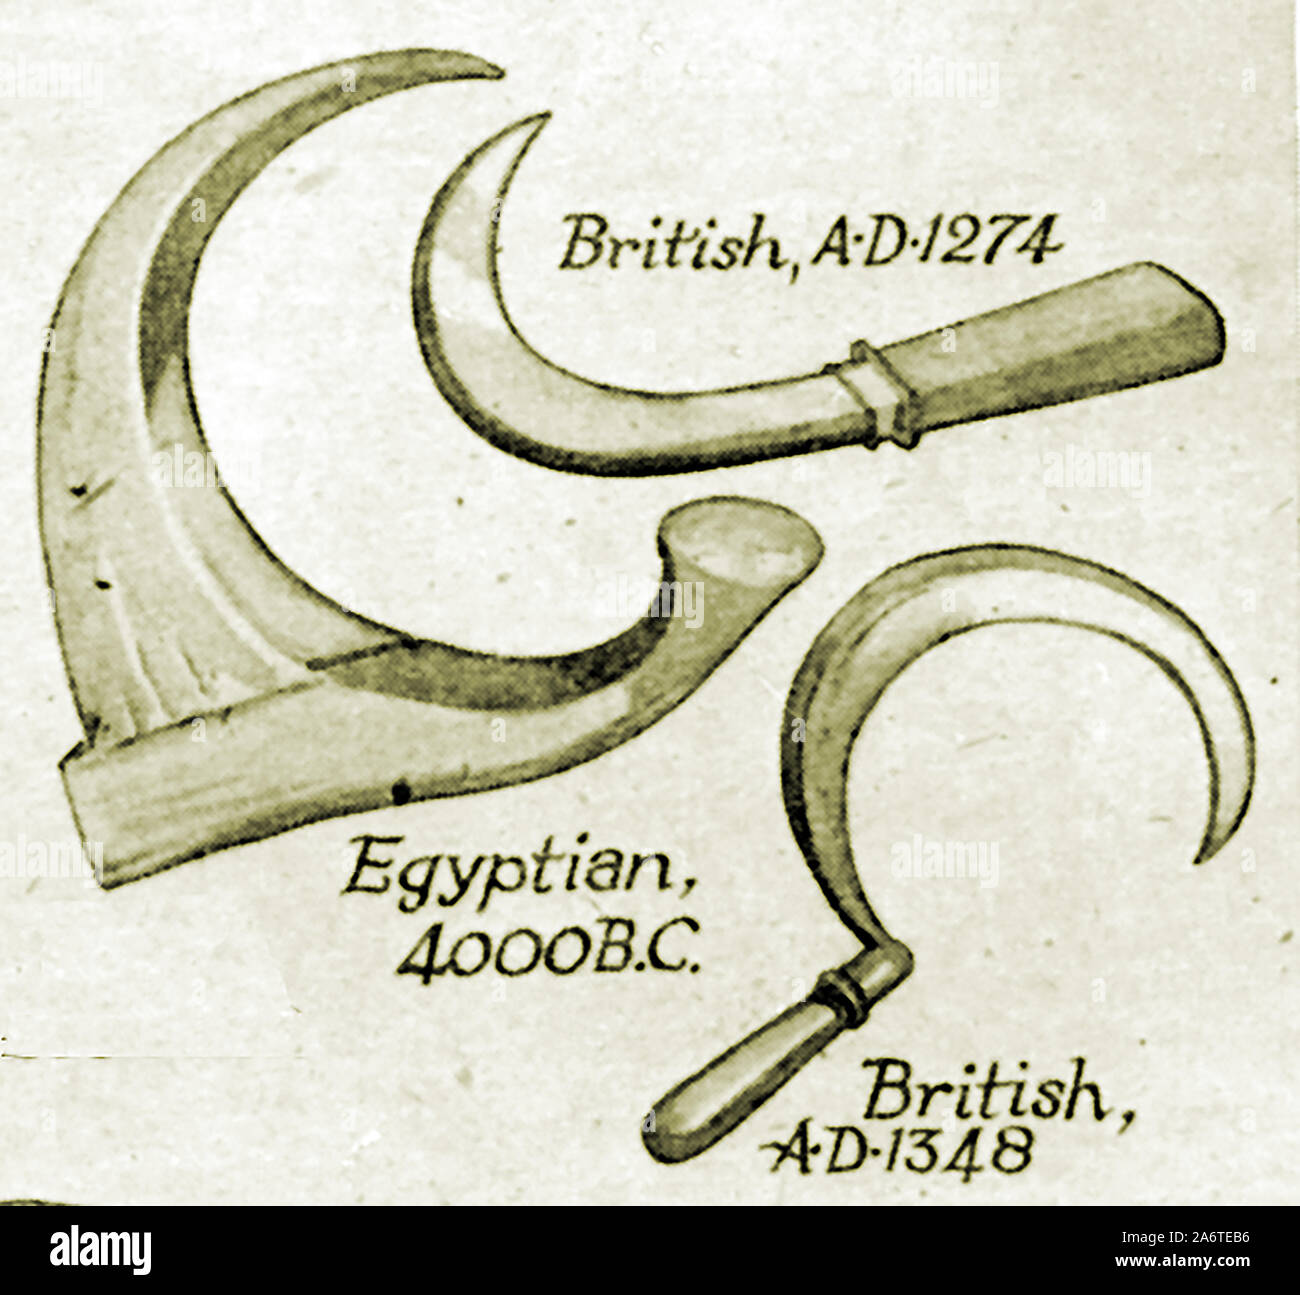 British farming & Horticulture tools through the ages- Sickles Stock Photo